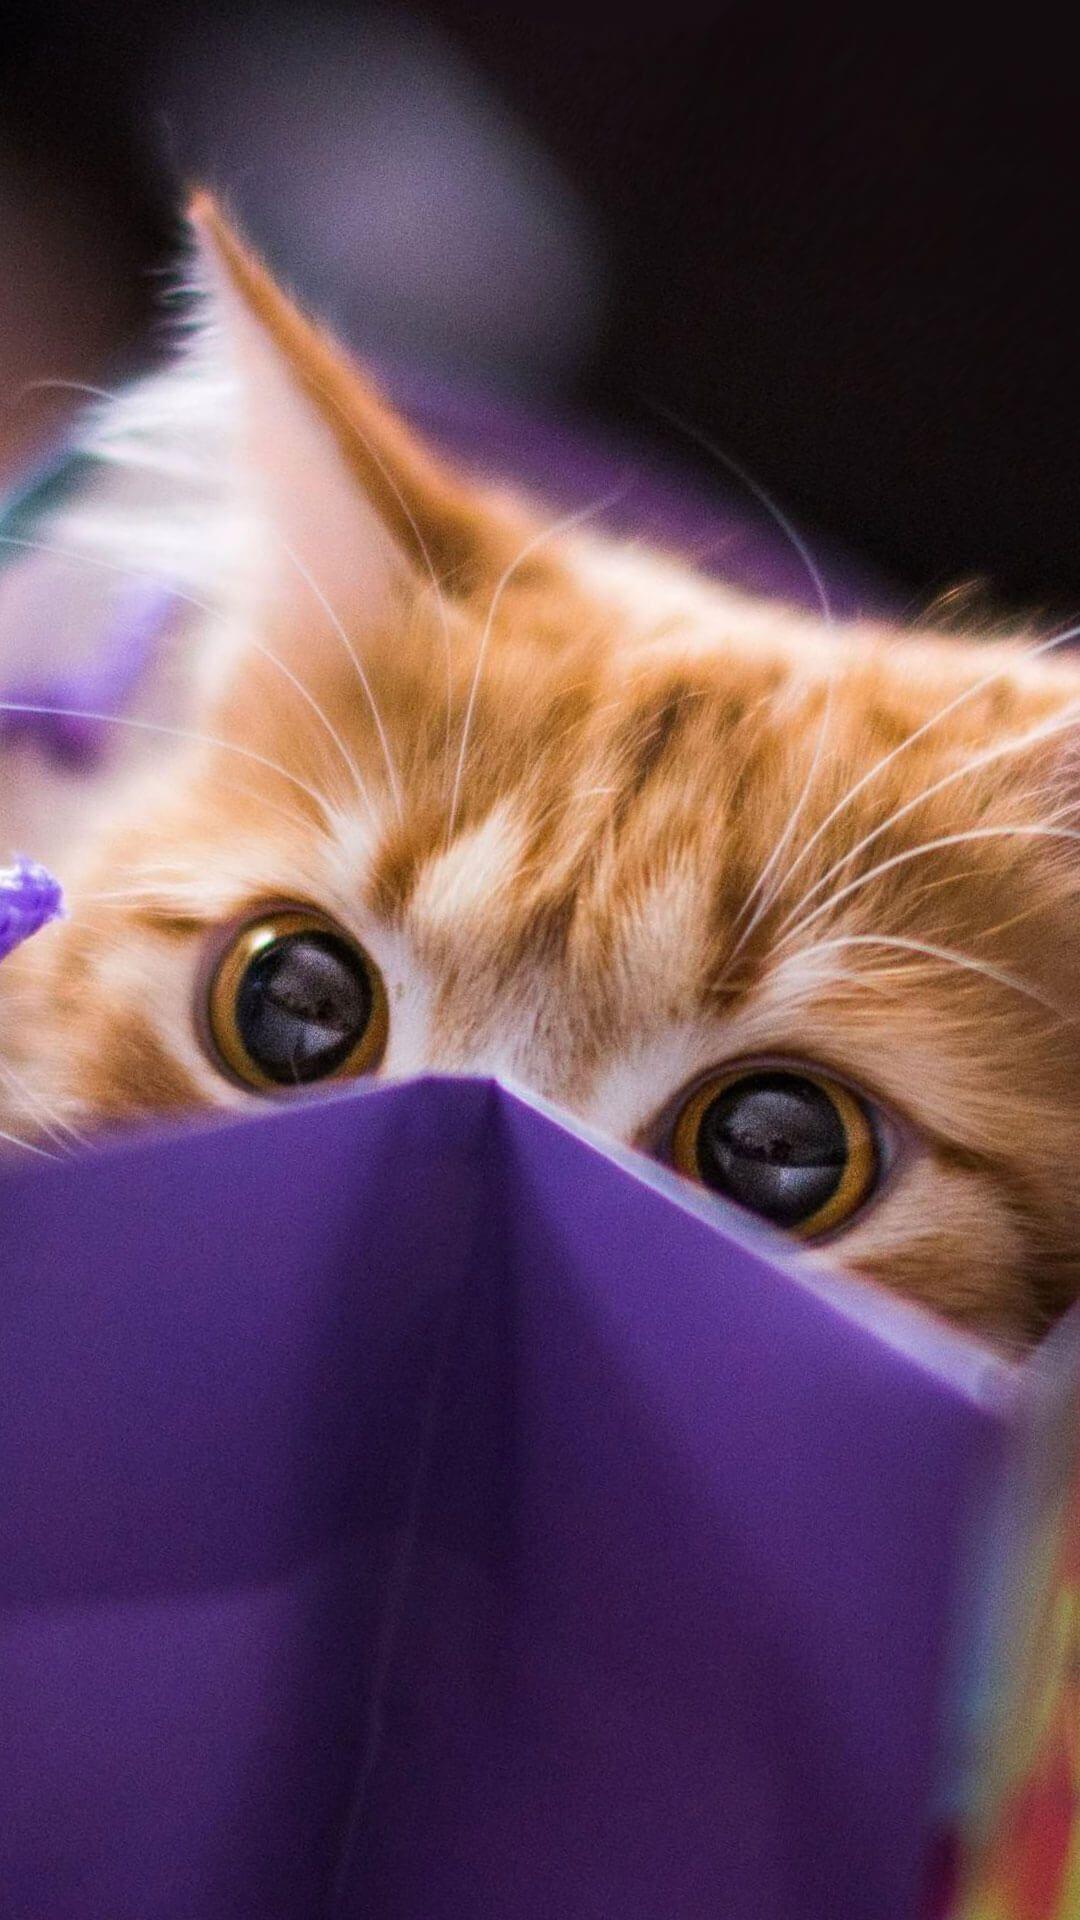 IPhone wallpaper of a cat peeking out from a purple bag - Cat